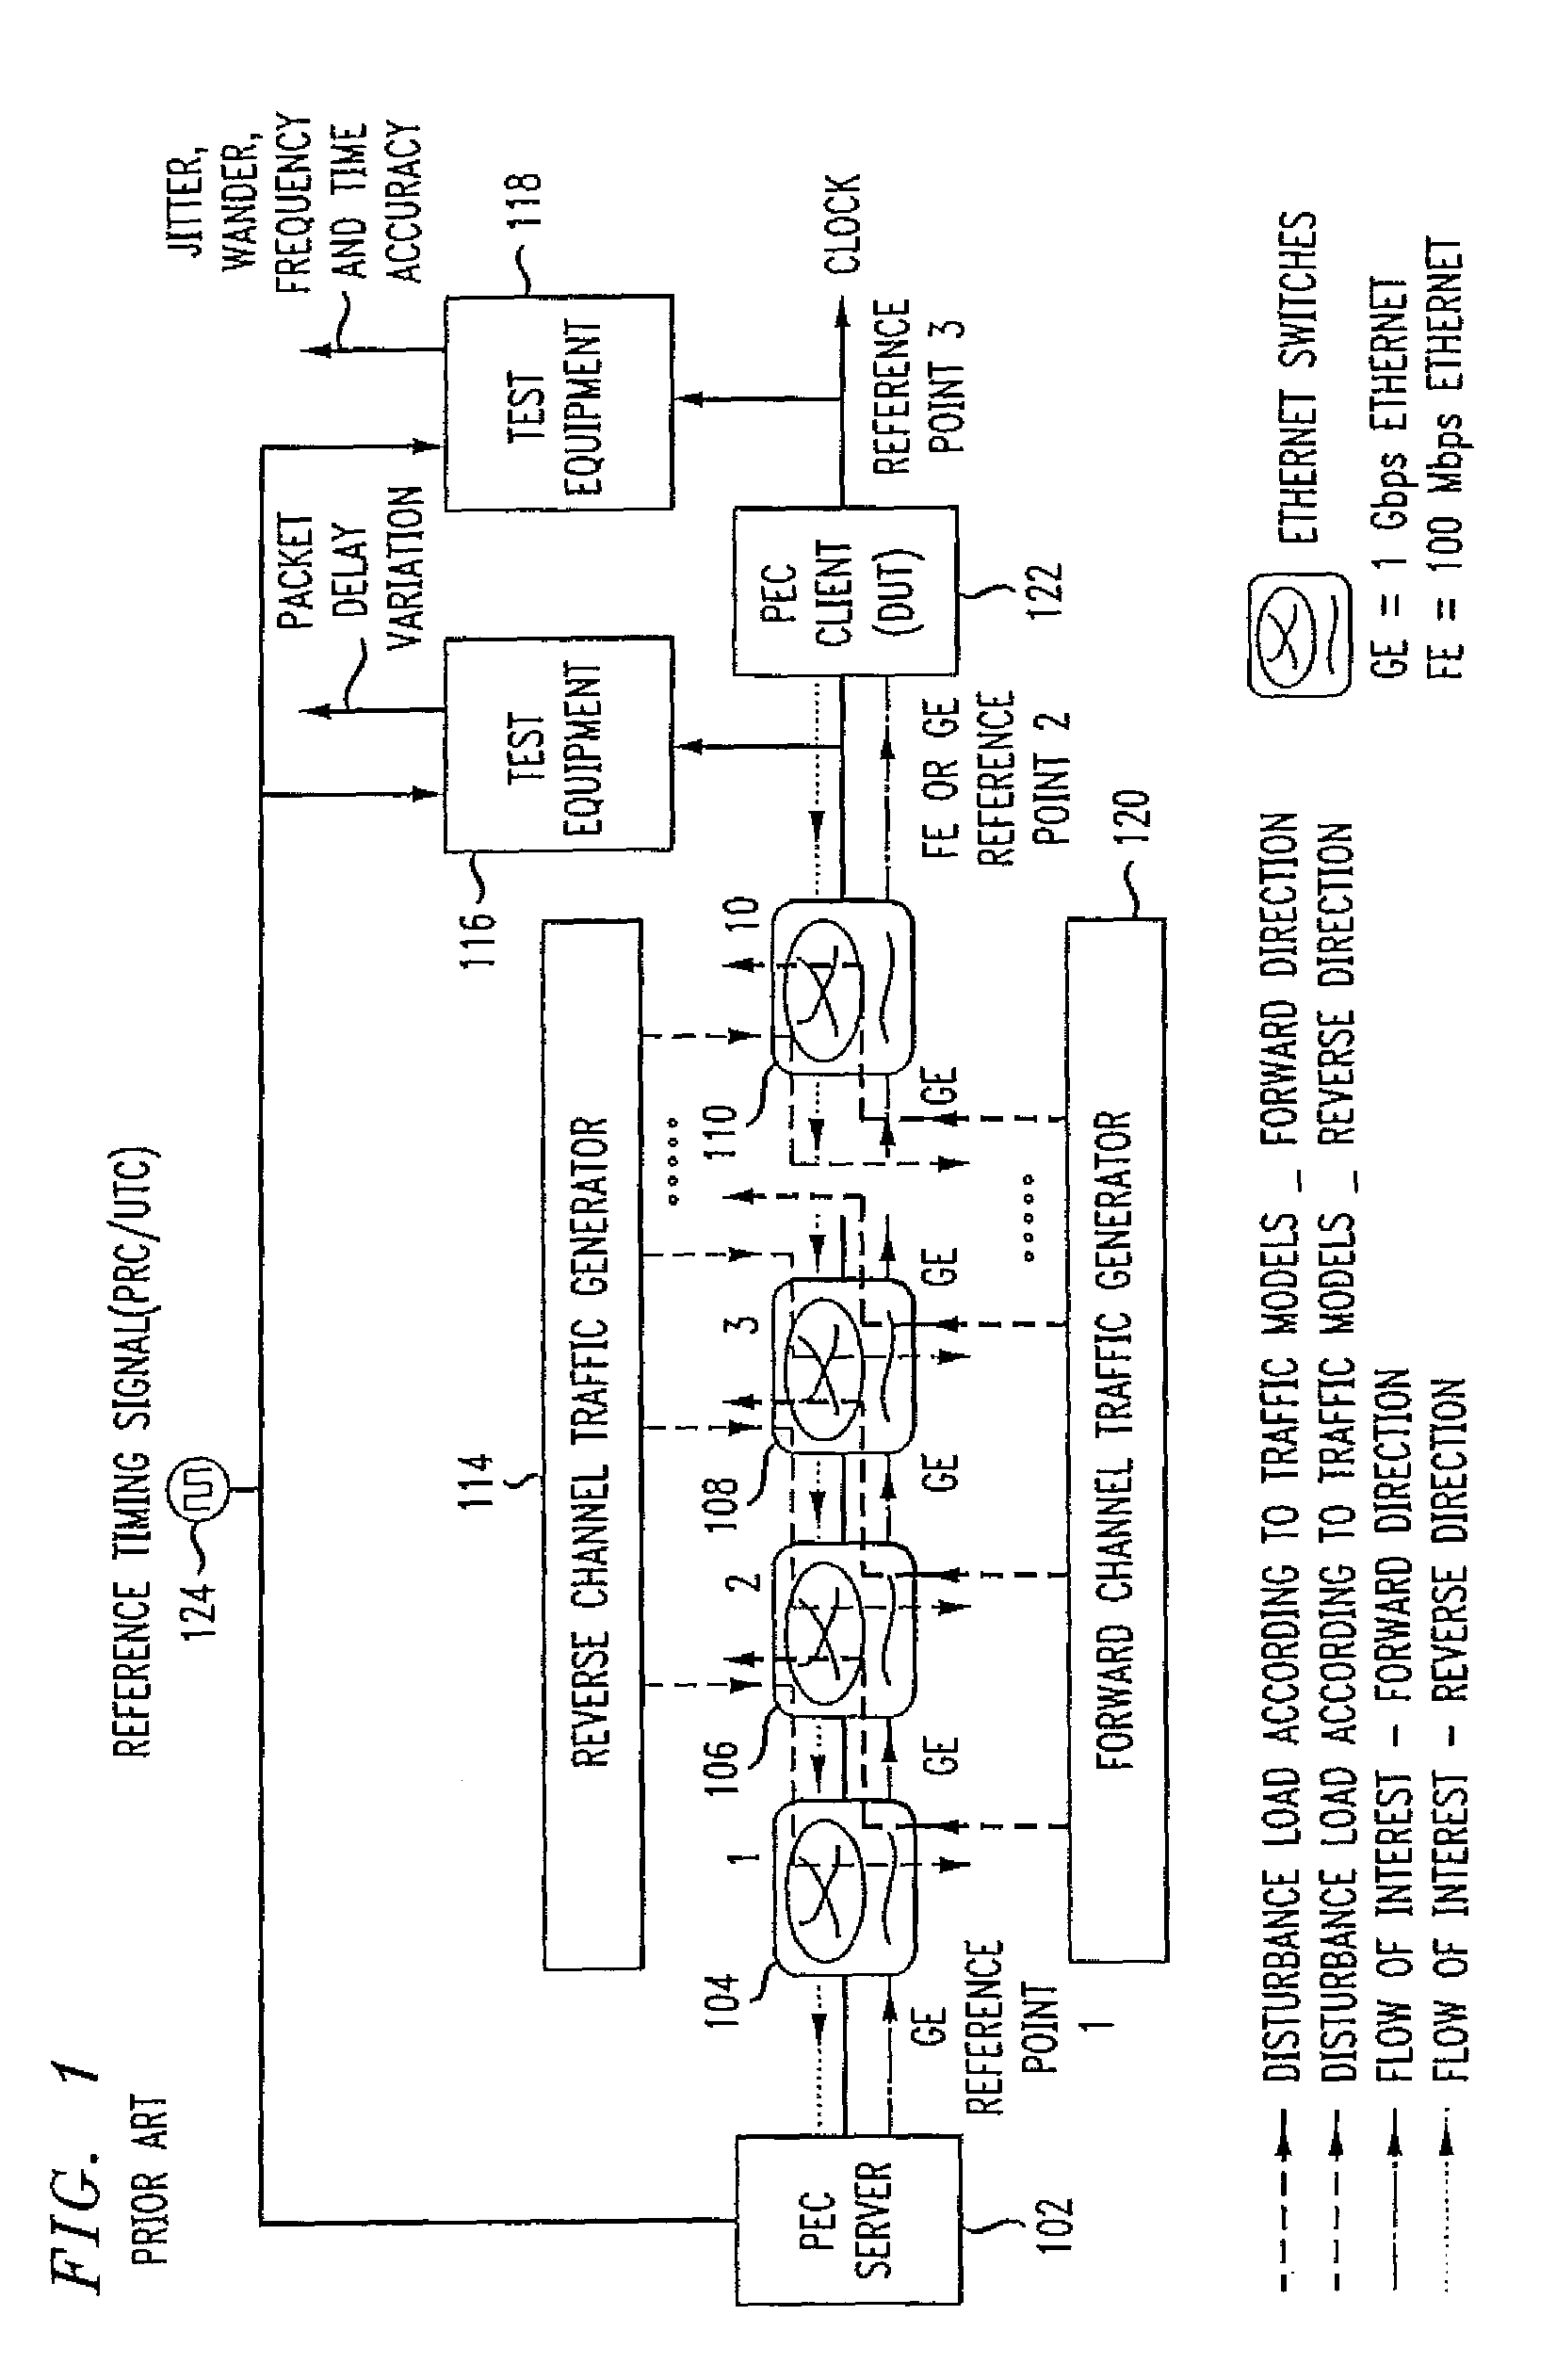 Connectionless configurations for stress testing timing and synchronization in data packet networks